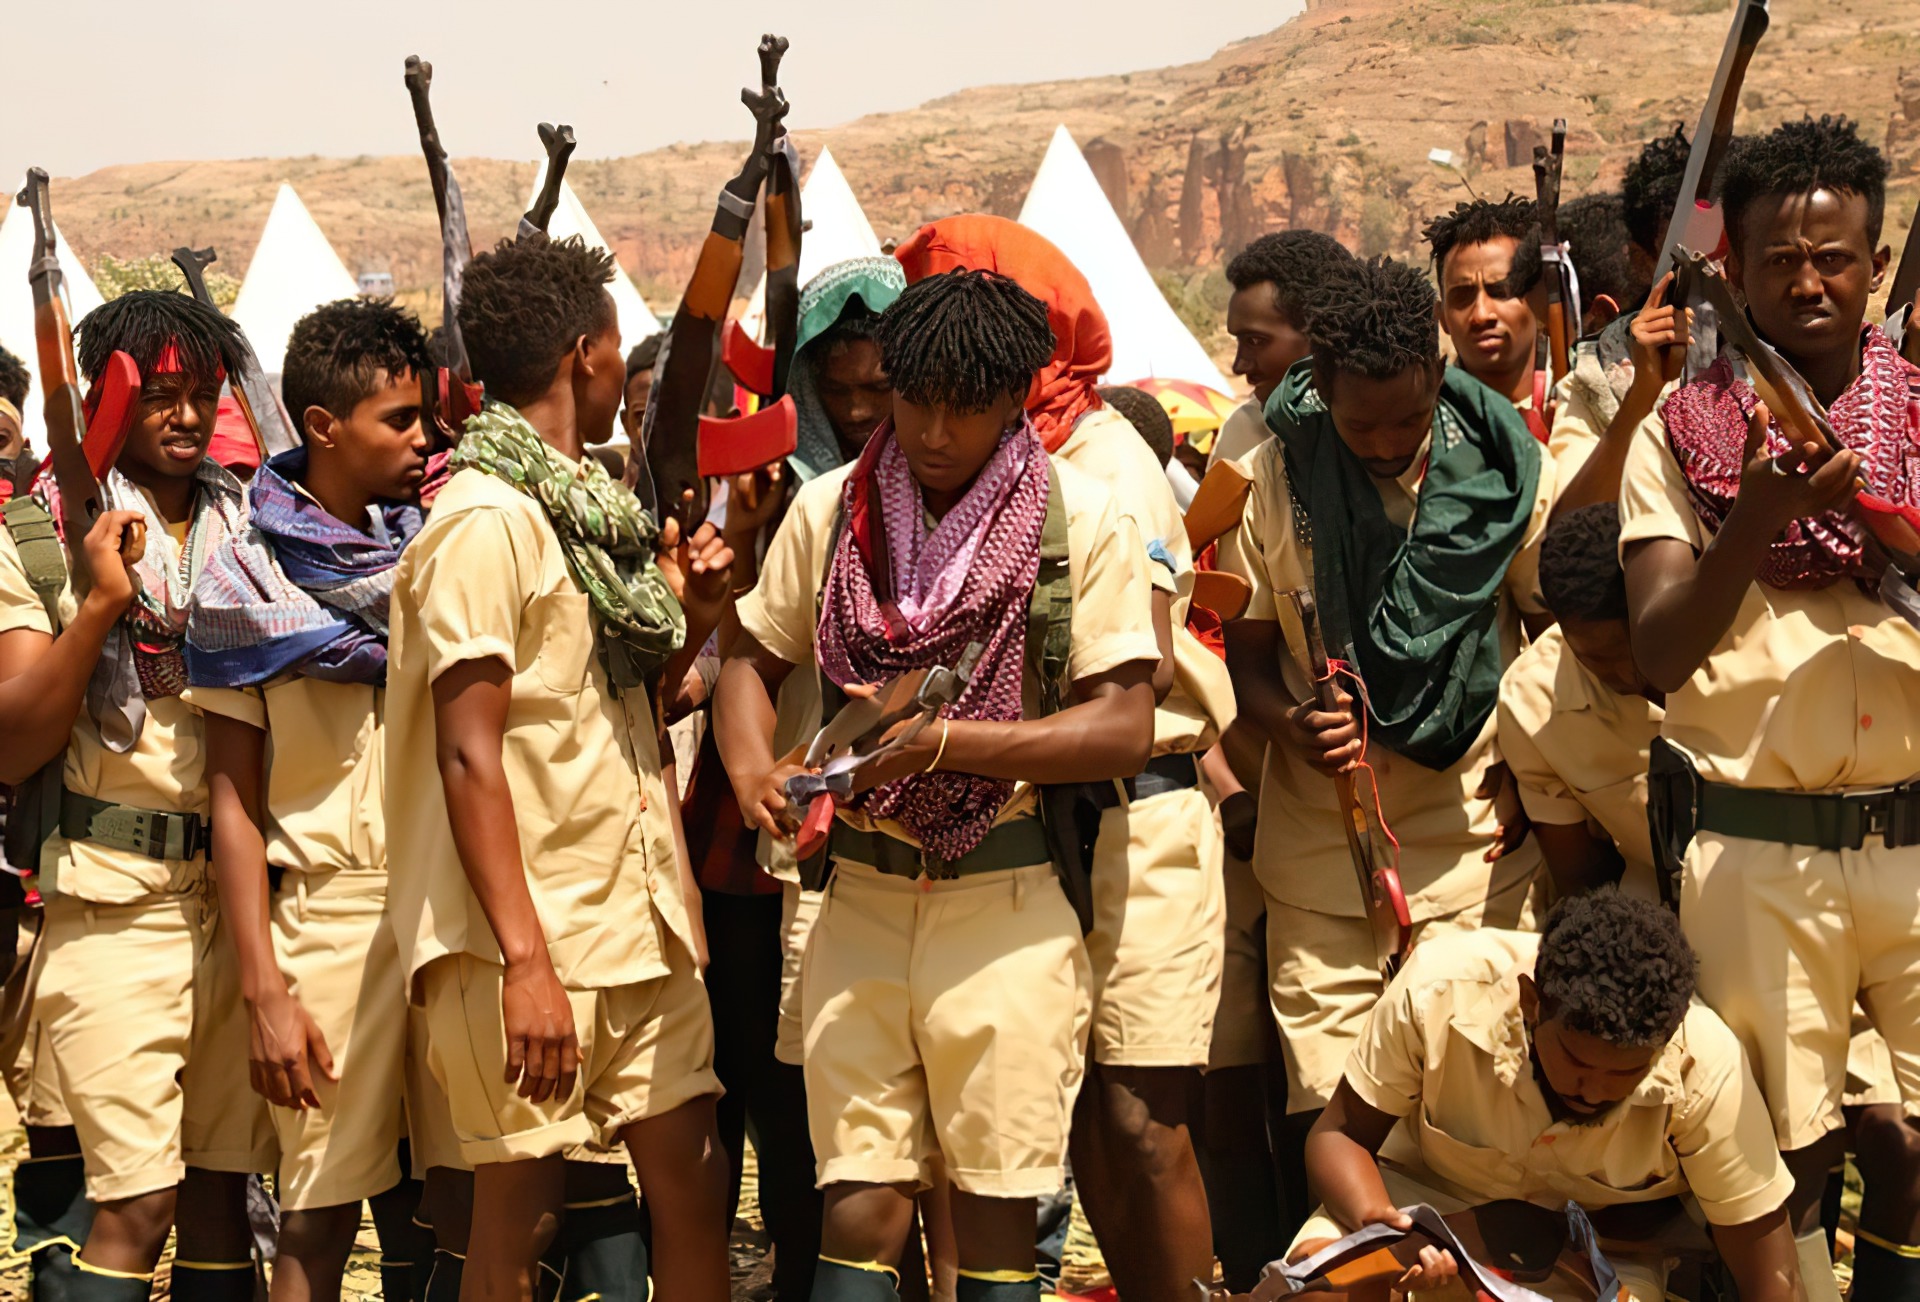 TPLF can match the federal army